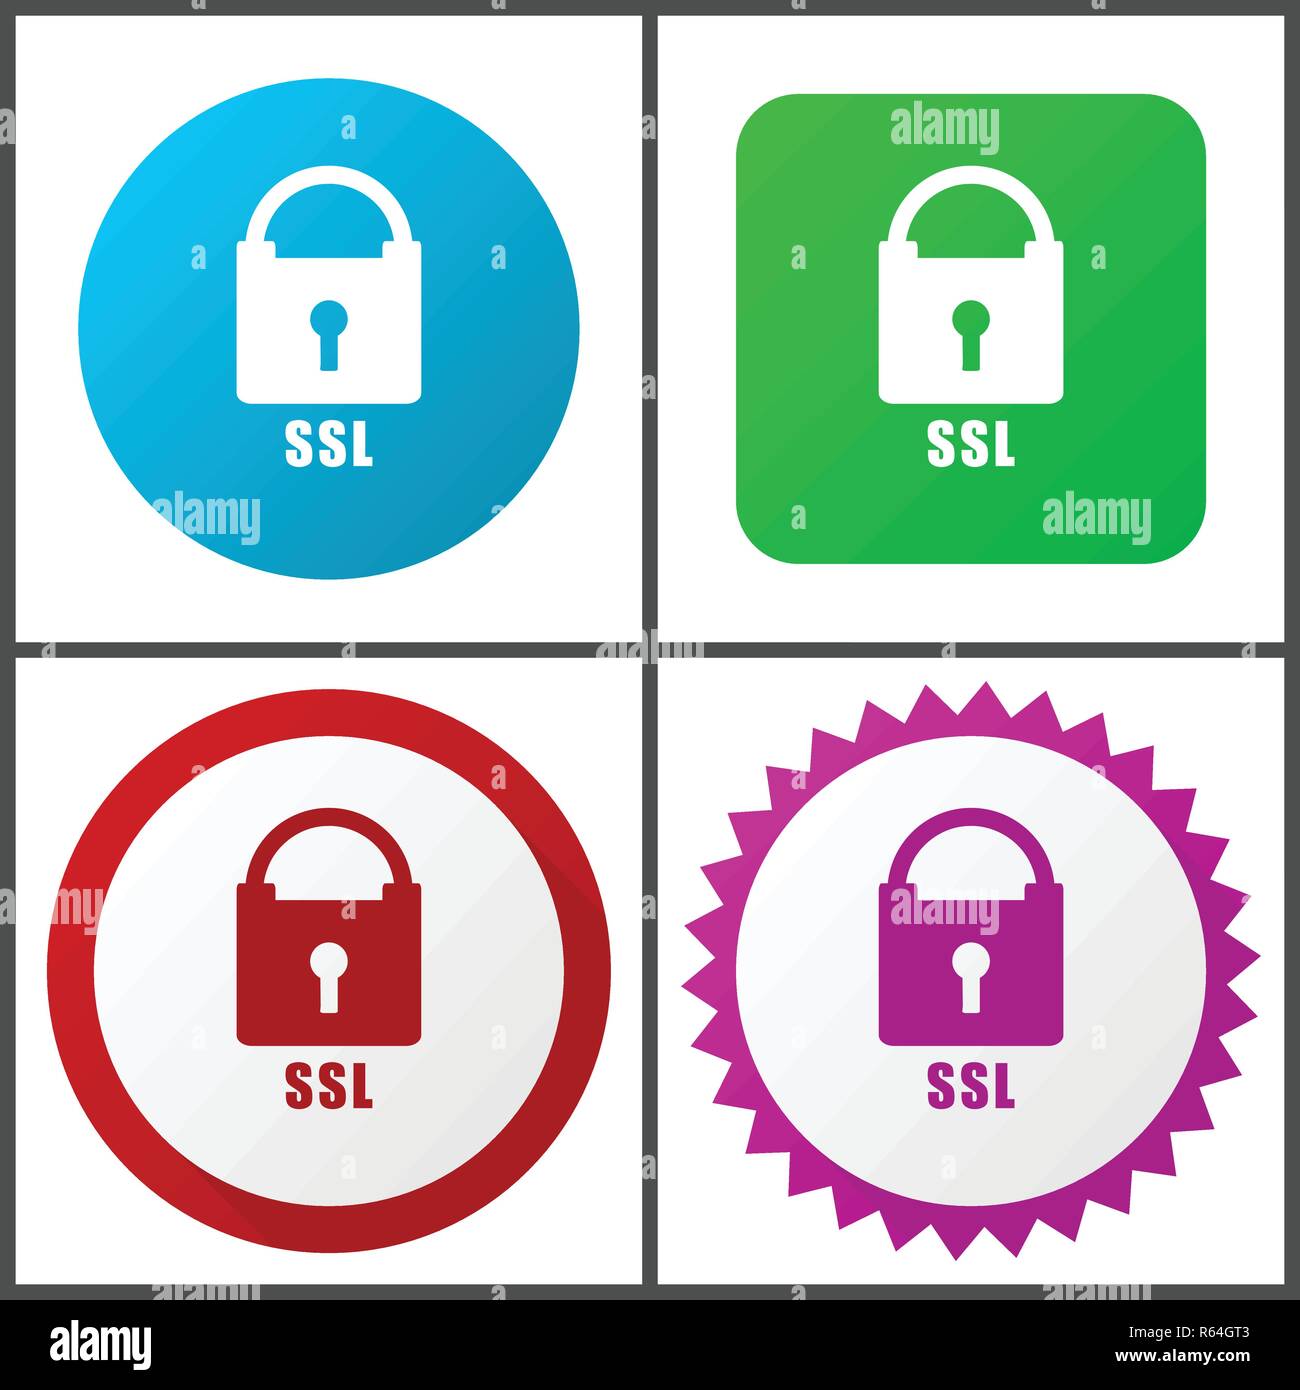 Csl red, blue, green and pink vector icon set. Web icons. Flat design signs and symbols easy to edit Stock Vector